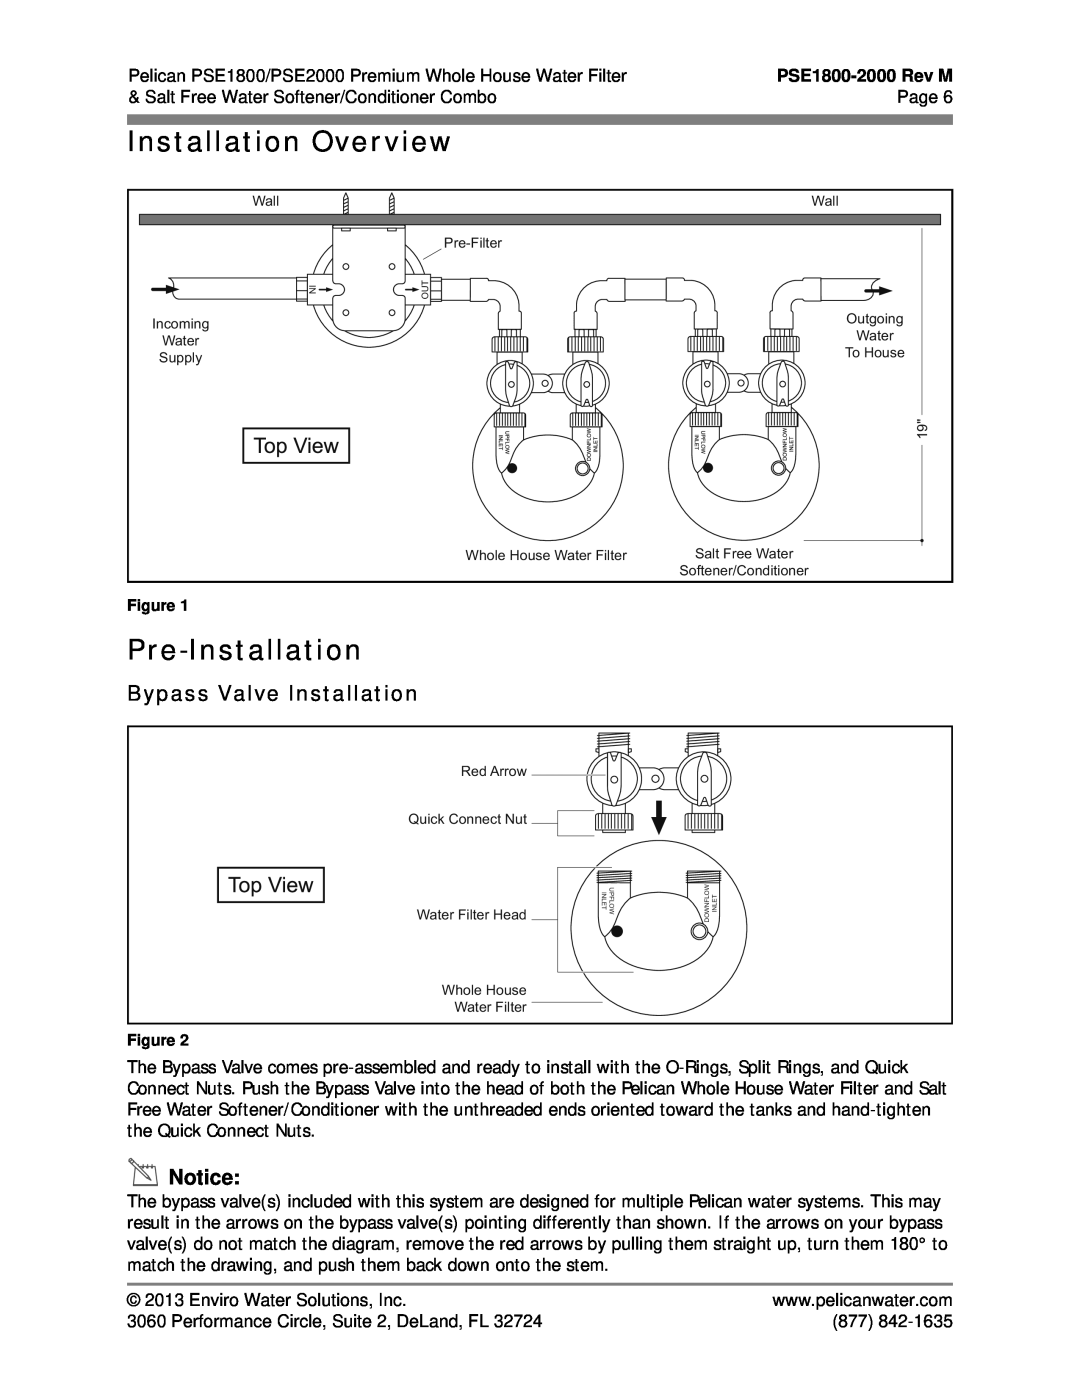 Pelican PSE2000 owner manual Installation Overview, Pre-Installation, Bypass Valve Installation, PSE1800-2000Rev M 